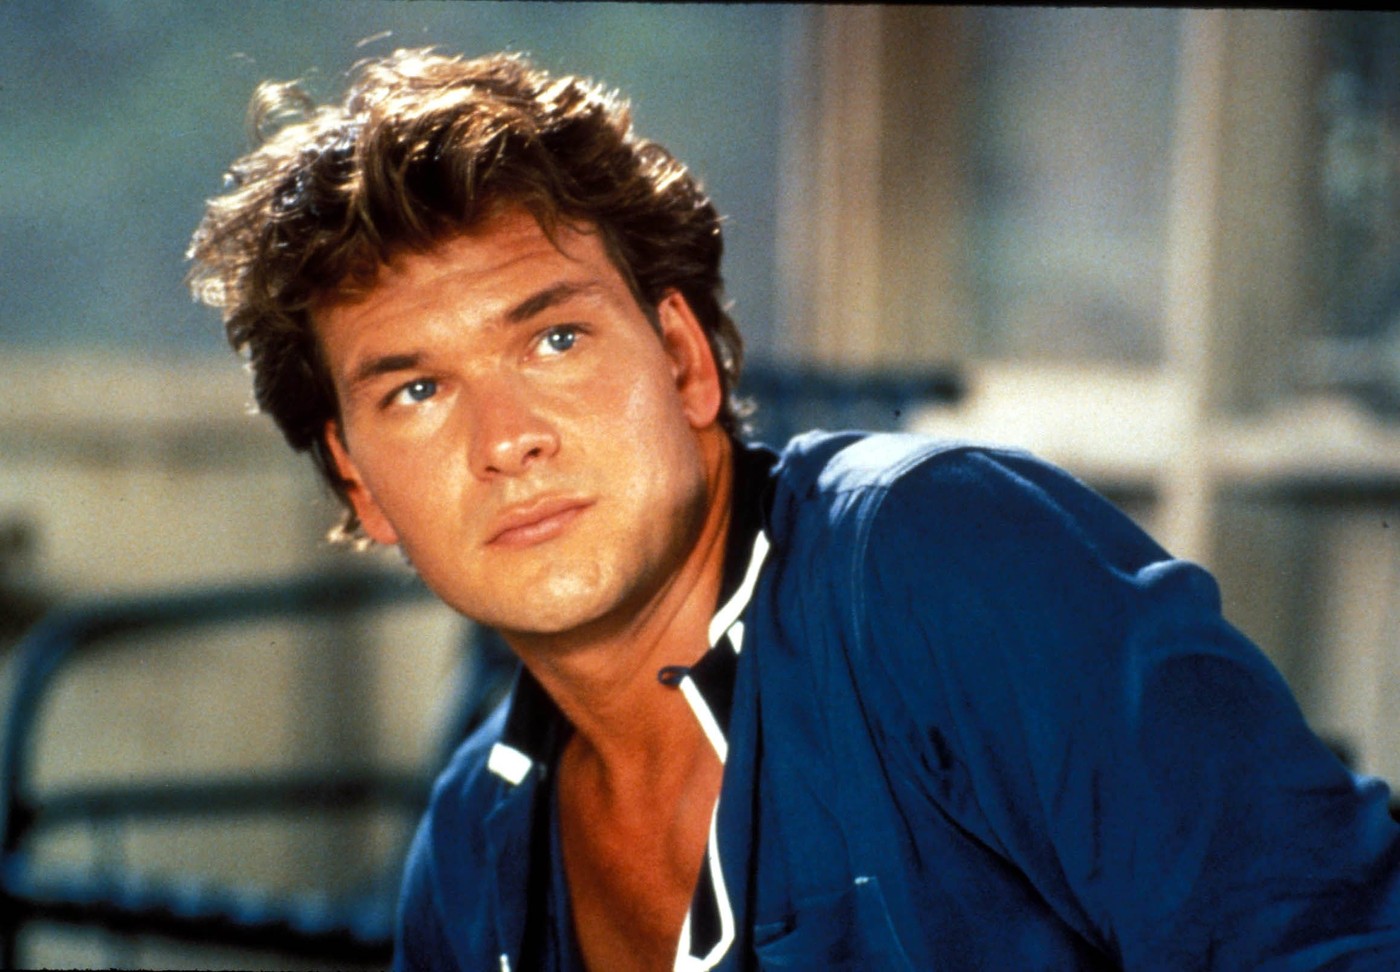 Patrick Swayze Photo Colection Wall S Top